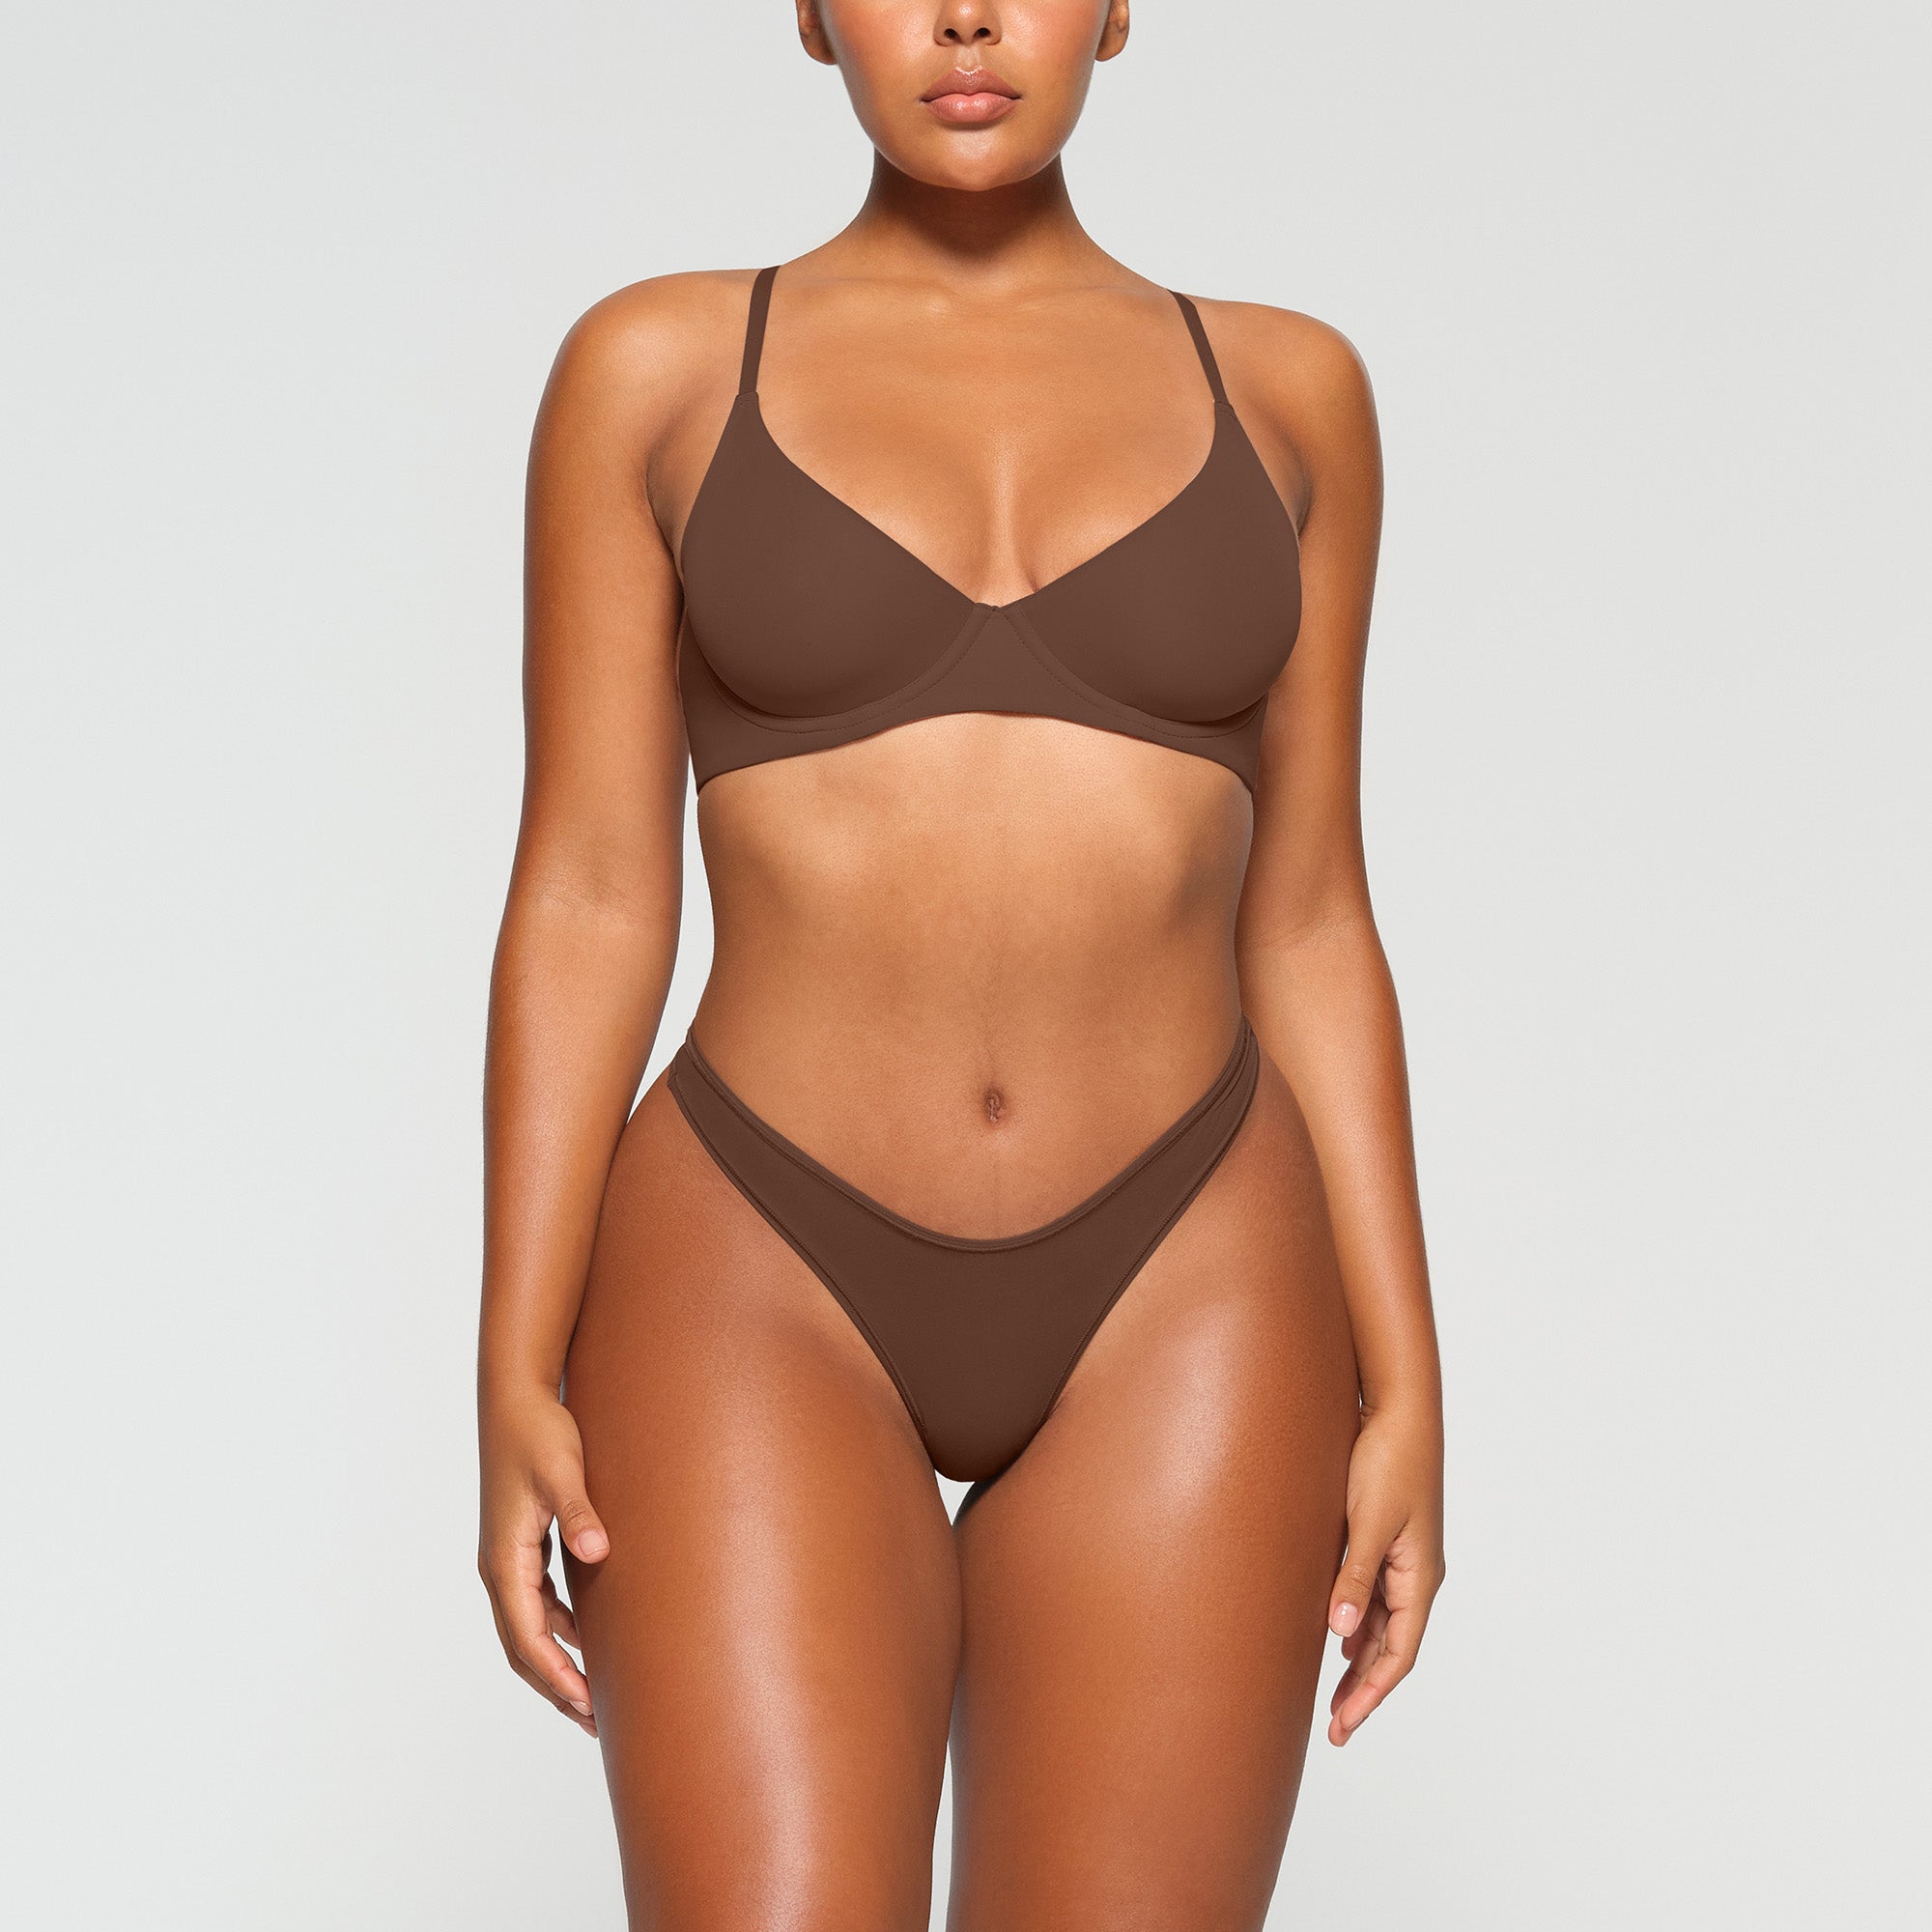 SKIMS weightless demi bra Tan Size 32 E / DD - $20 (65% Off Retail) New  With Tags - From Taylor